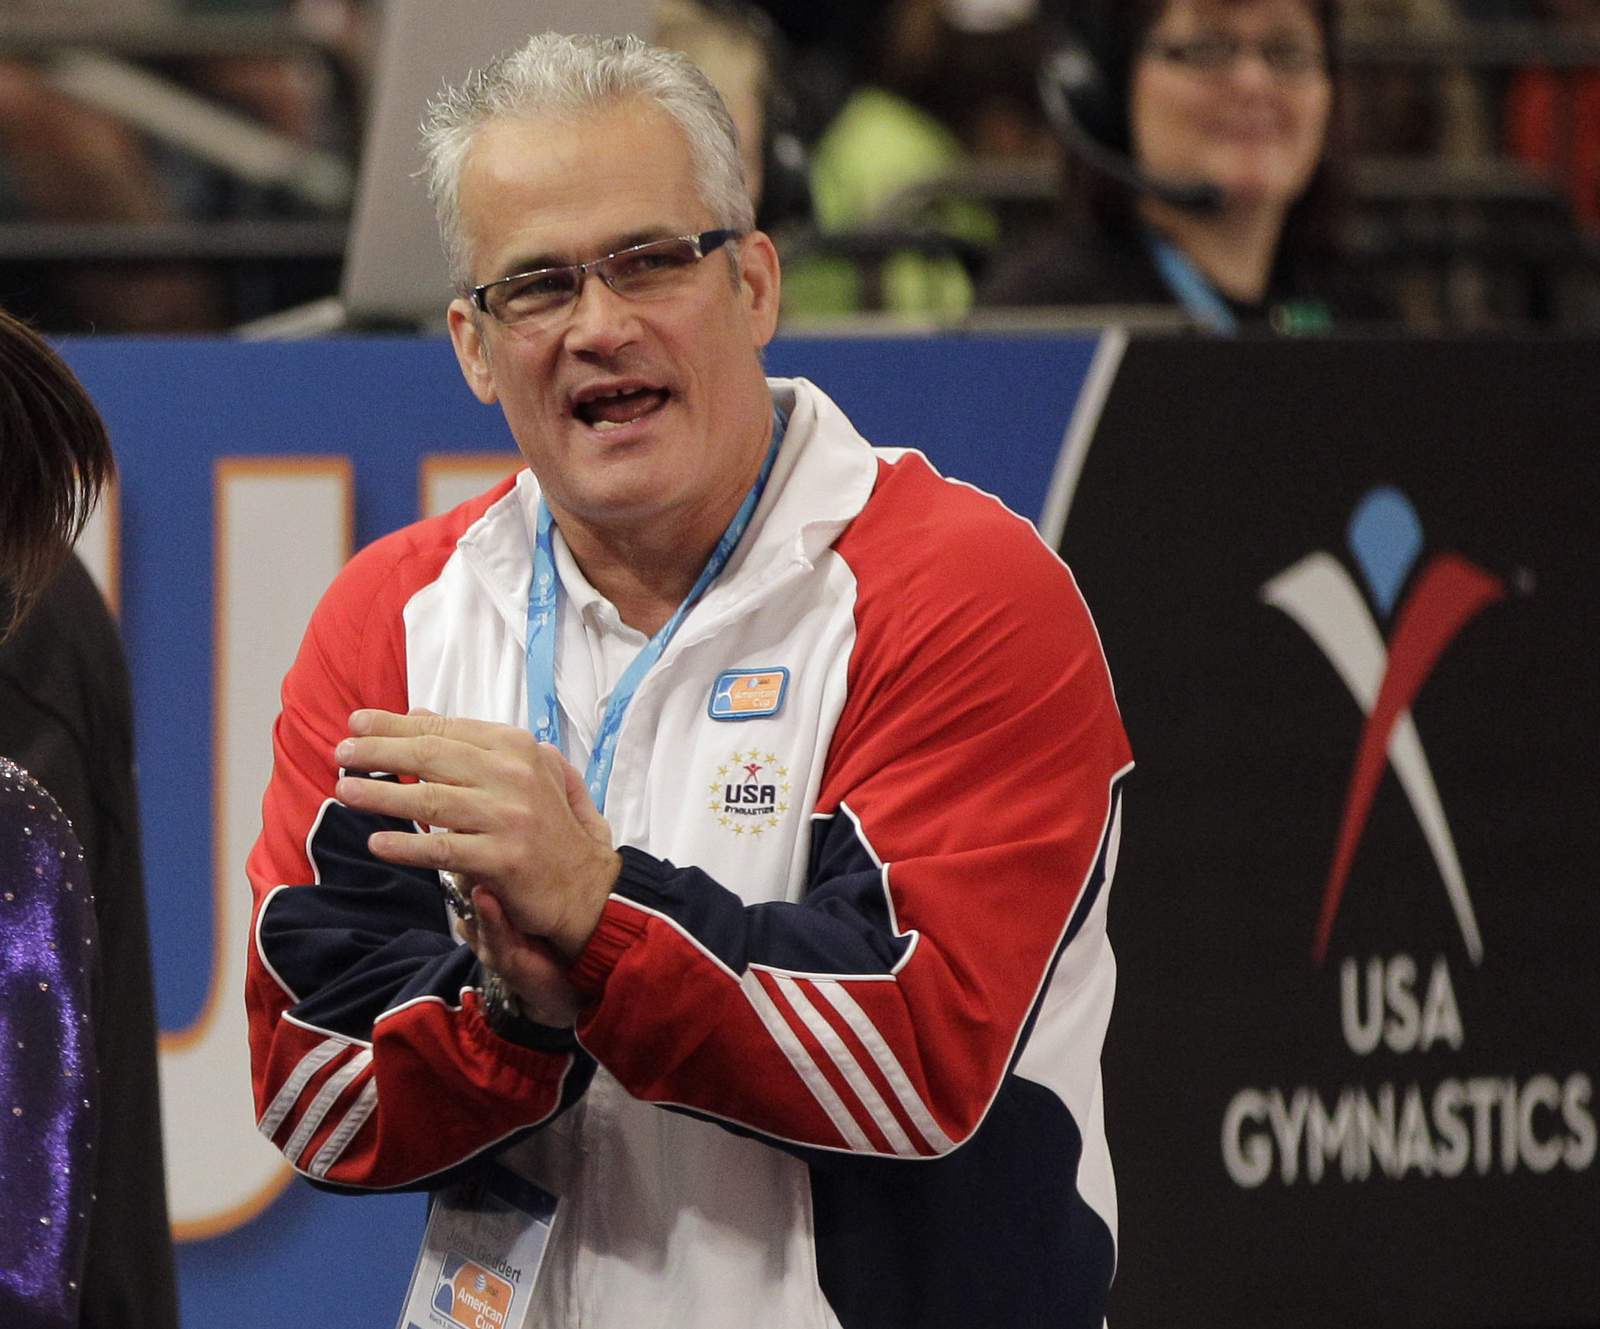 Olympics gymnastics coach dies by suicide after being charged with two dozen crimes, Michigan attorney general says